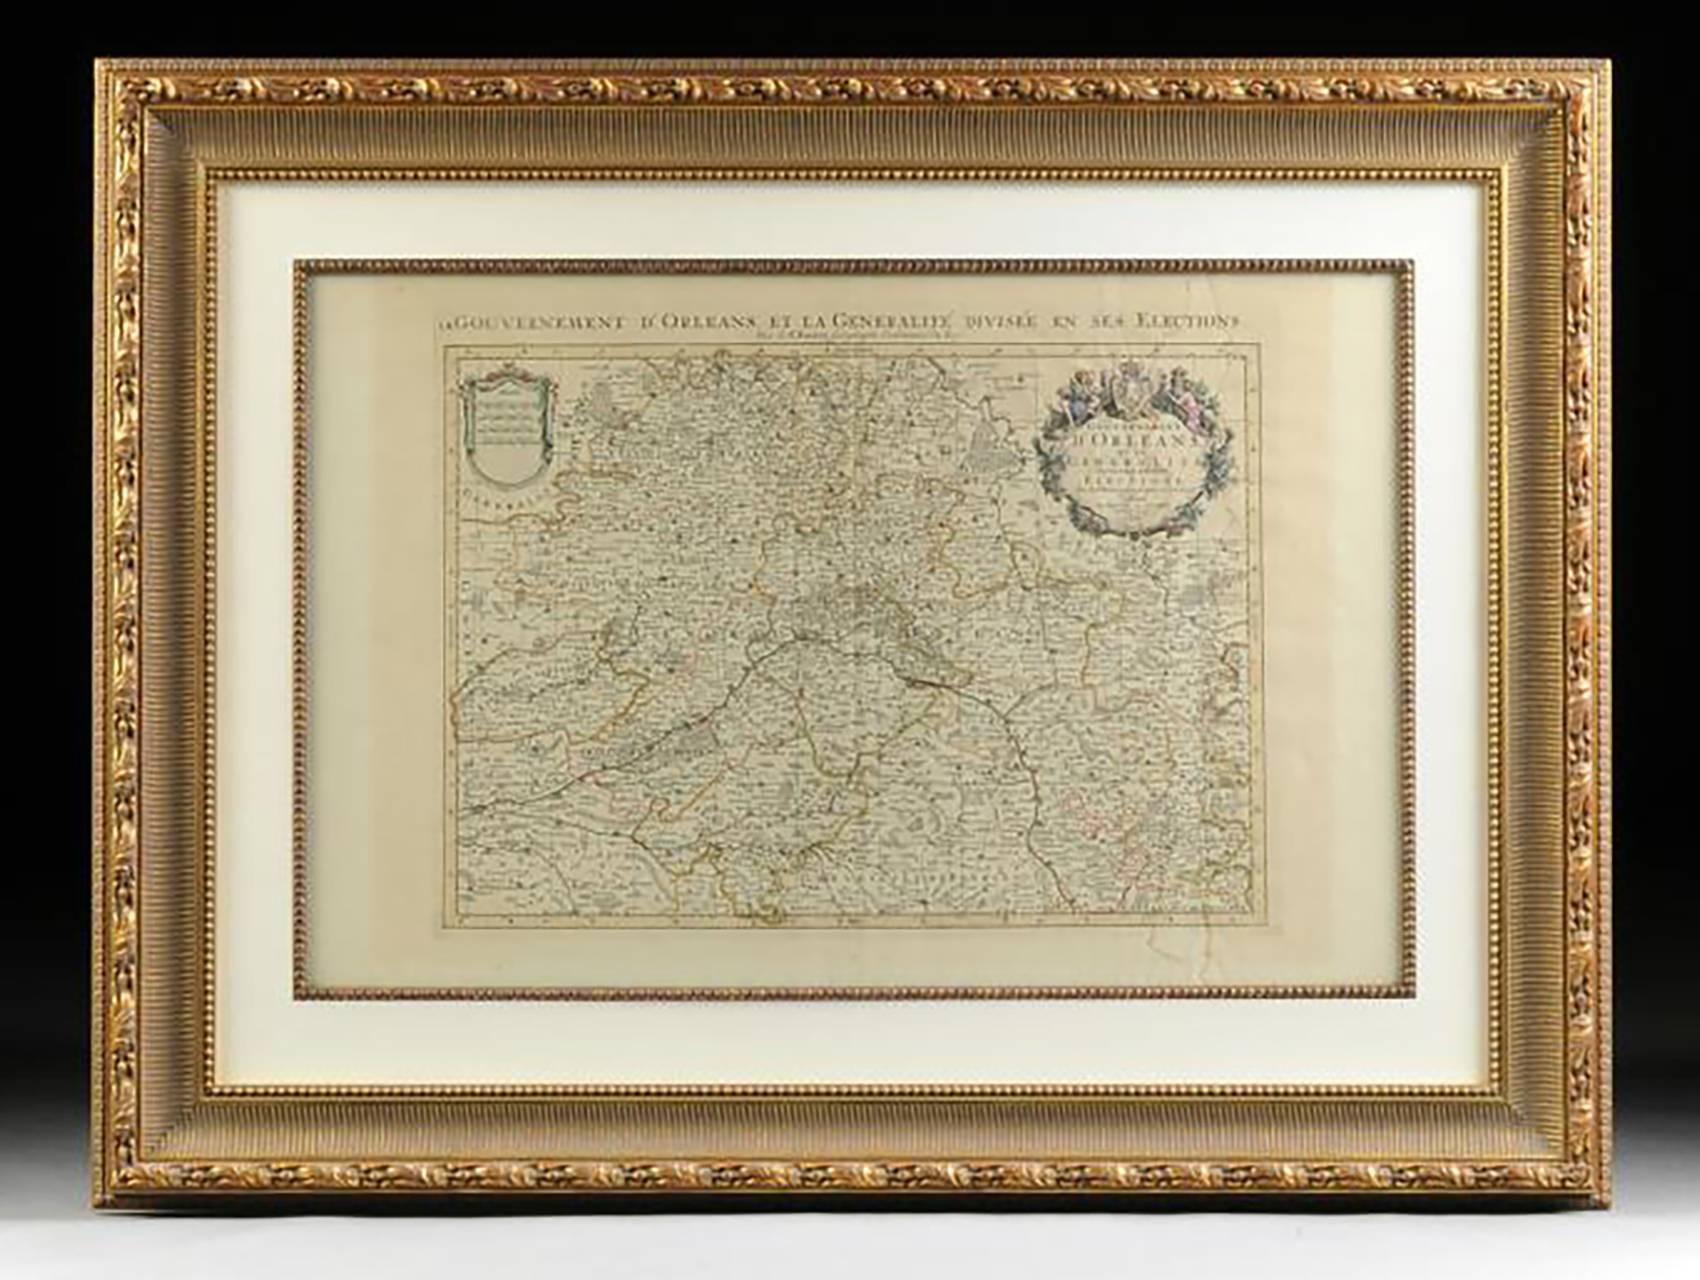 Alexis Hubert Jaillot Print - 17th Century Antique French Engraved Map of D’Orleans by H. Jaillot Dated 1696